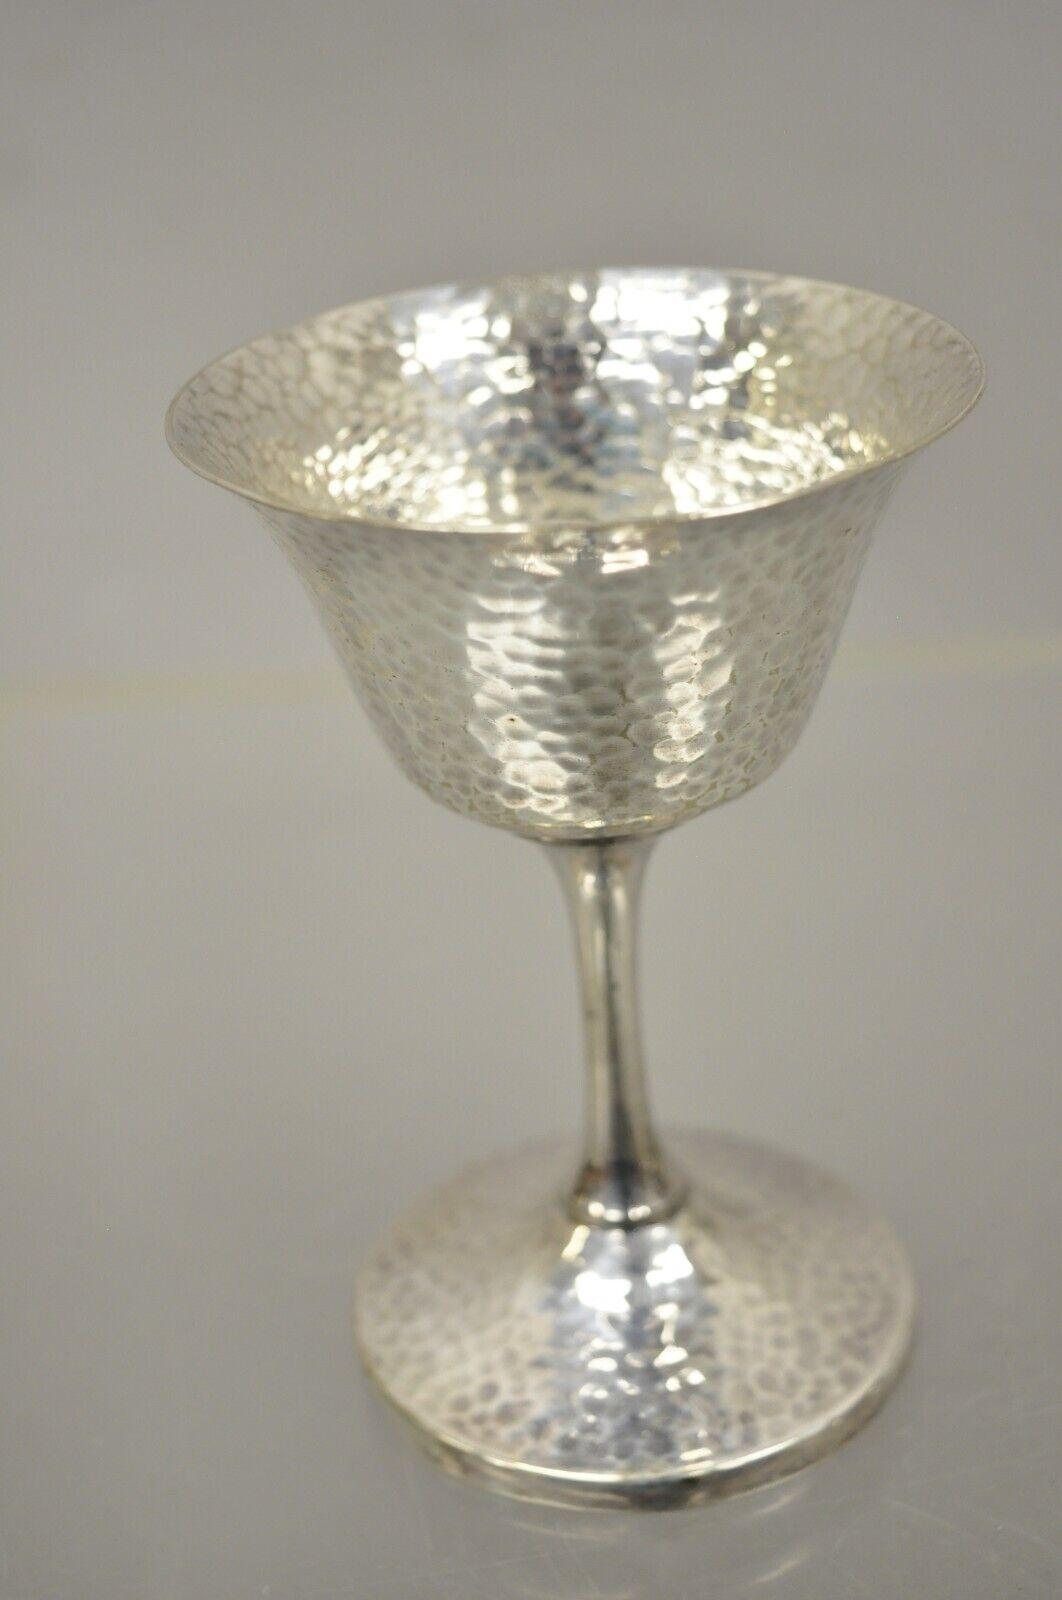 Vintage EGW & S Hammered silver plate wine goblets cups - set of 6. Item features (6) small goblets, hand hammered design. Circa early to mid 20th century. Measurements: 4.5